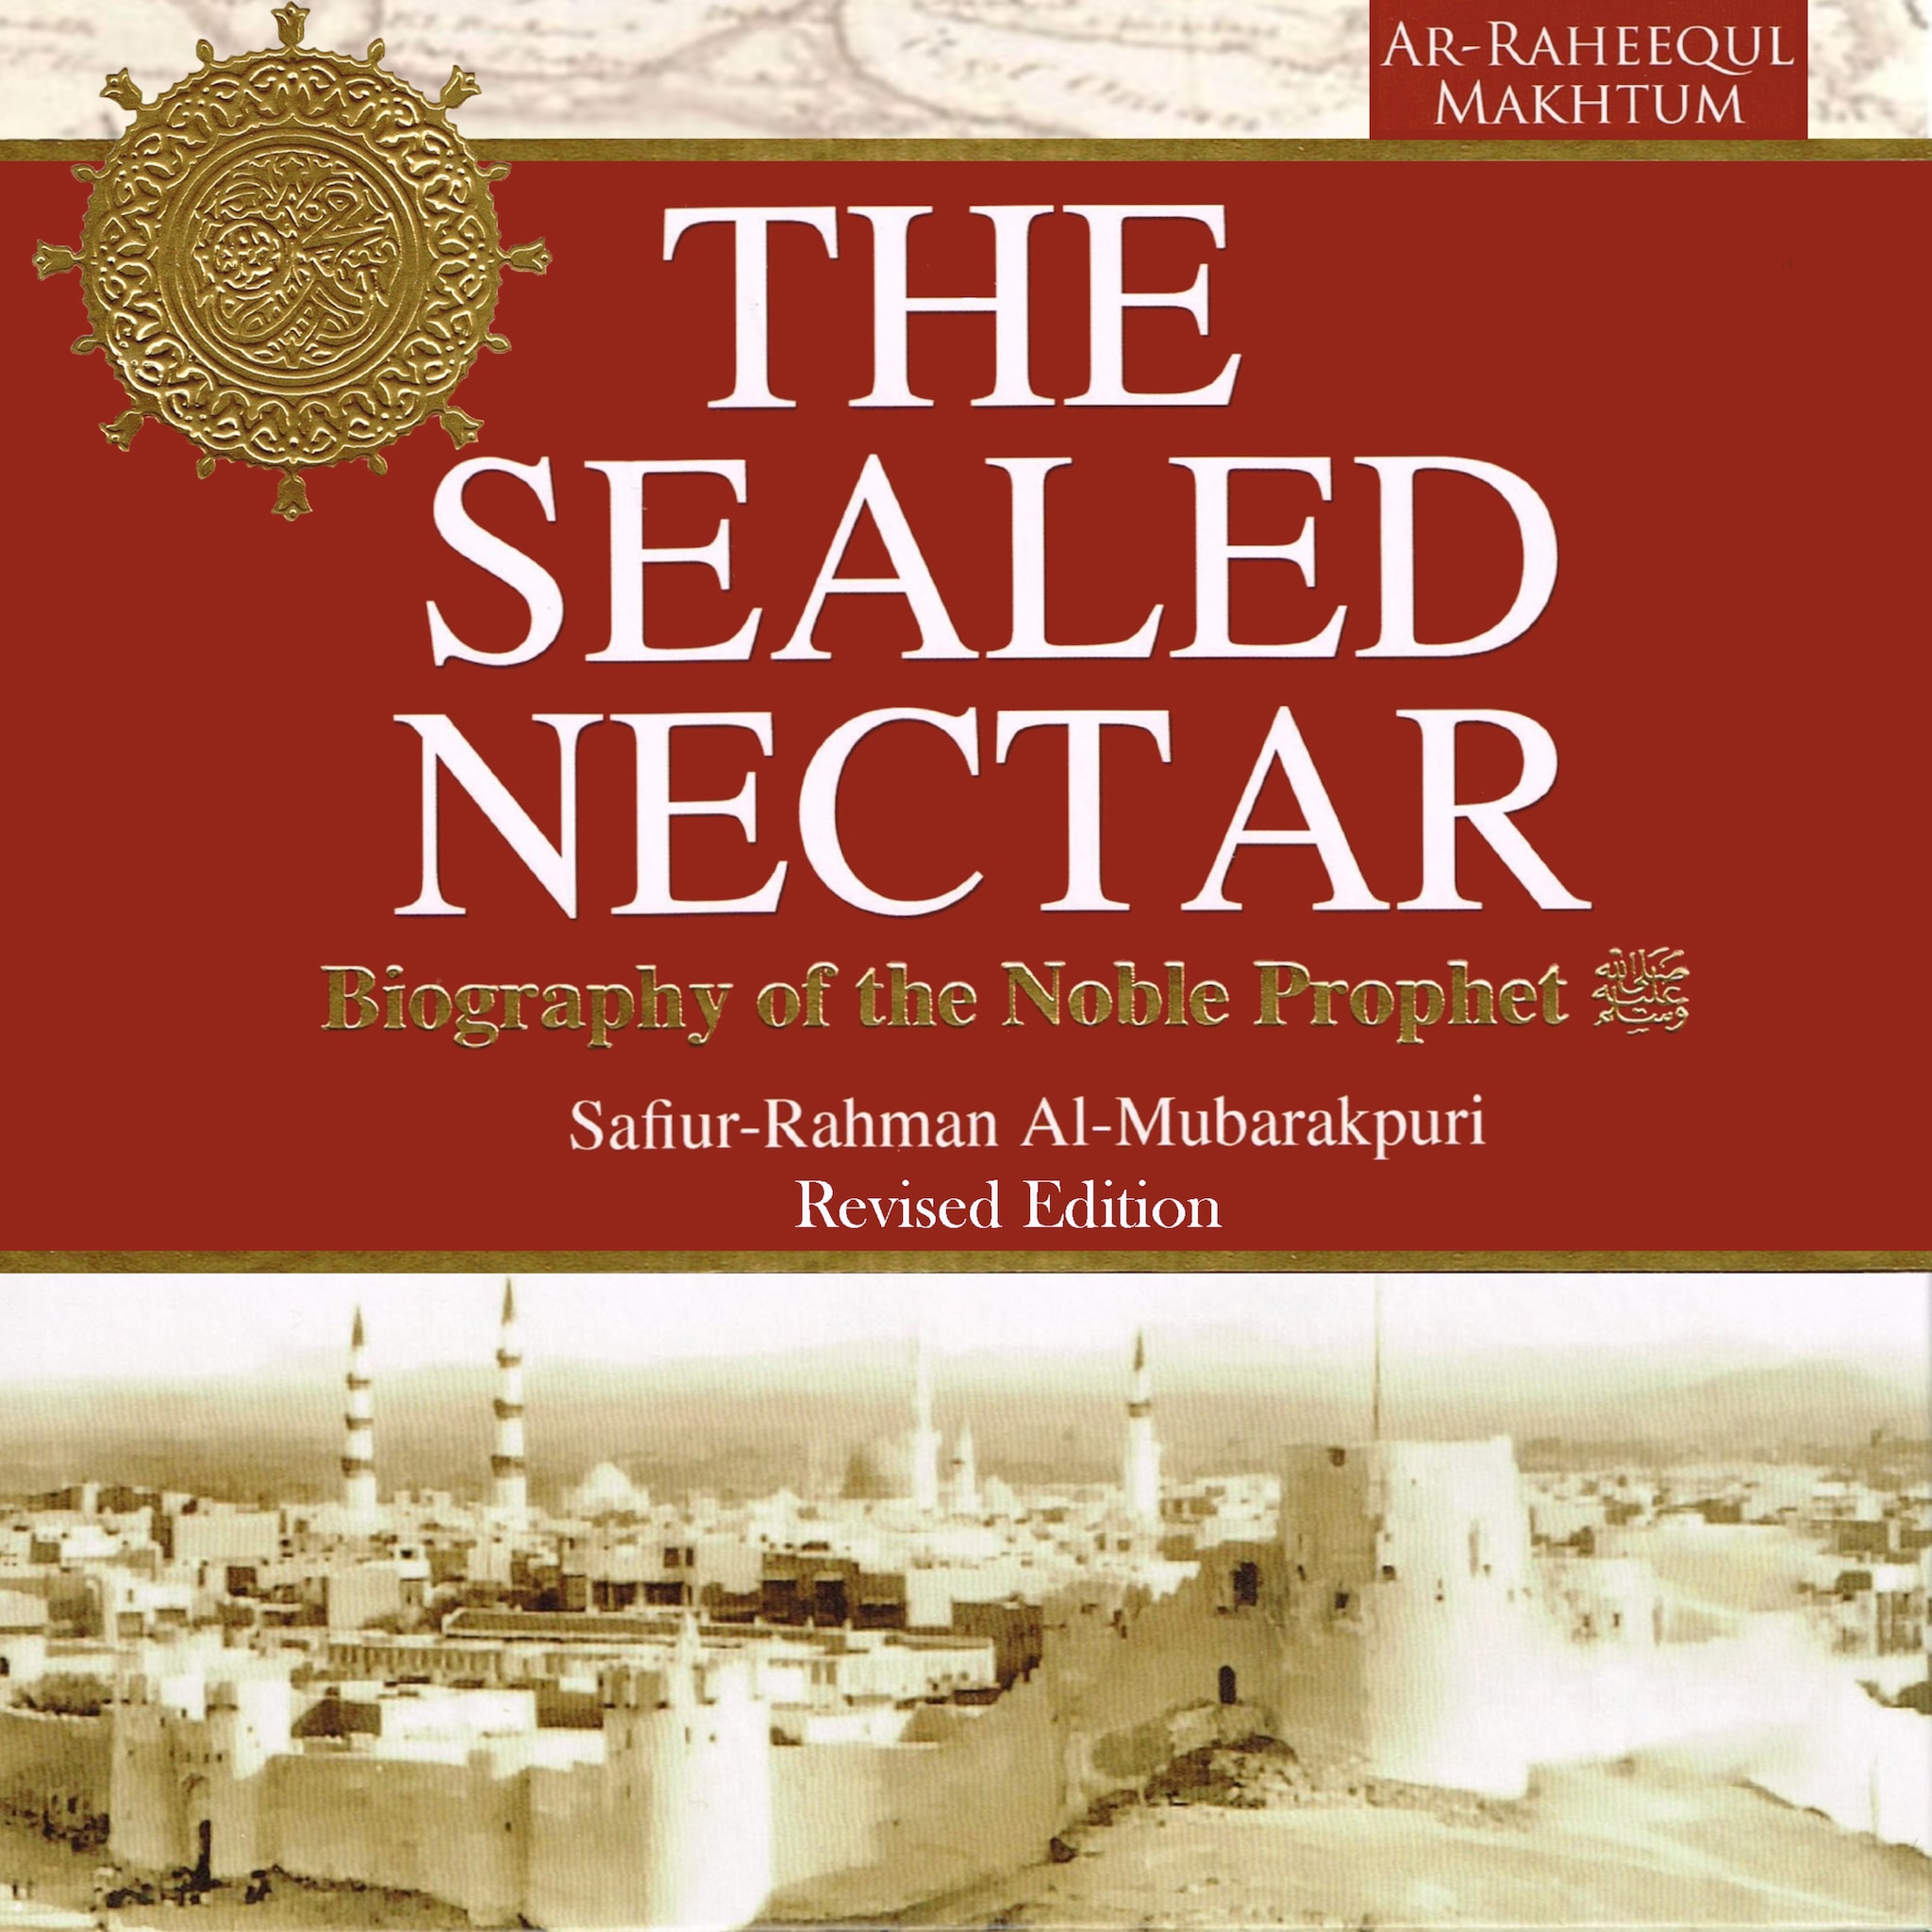 The Sealed Nectar: Biography of the Noble Prophet ilmaiseksi